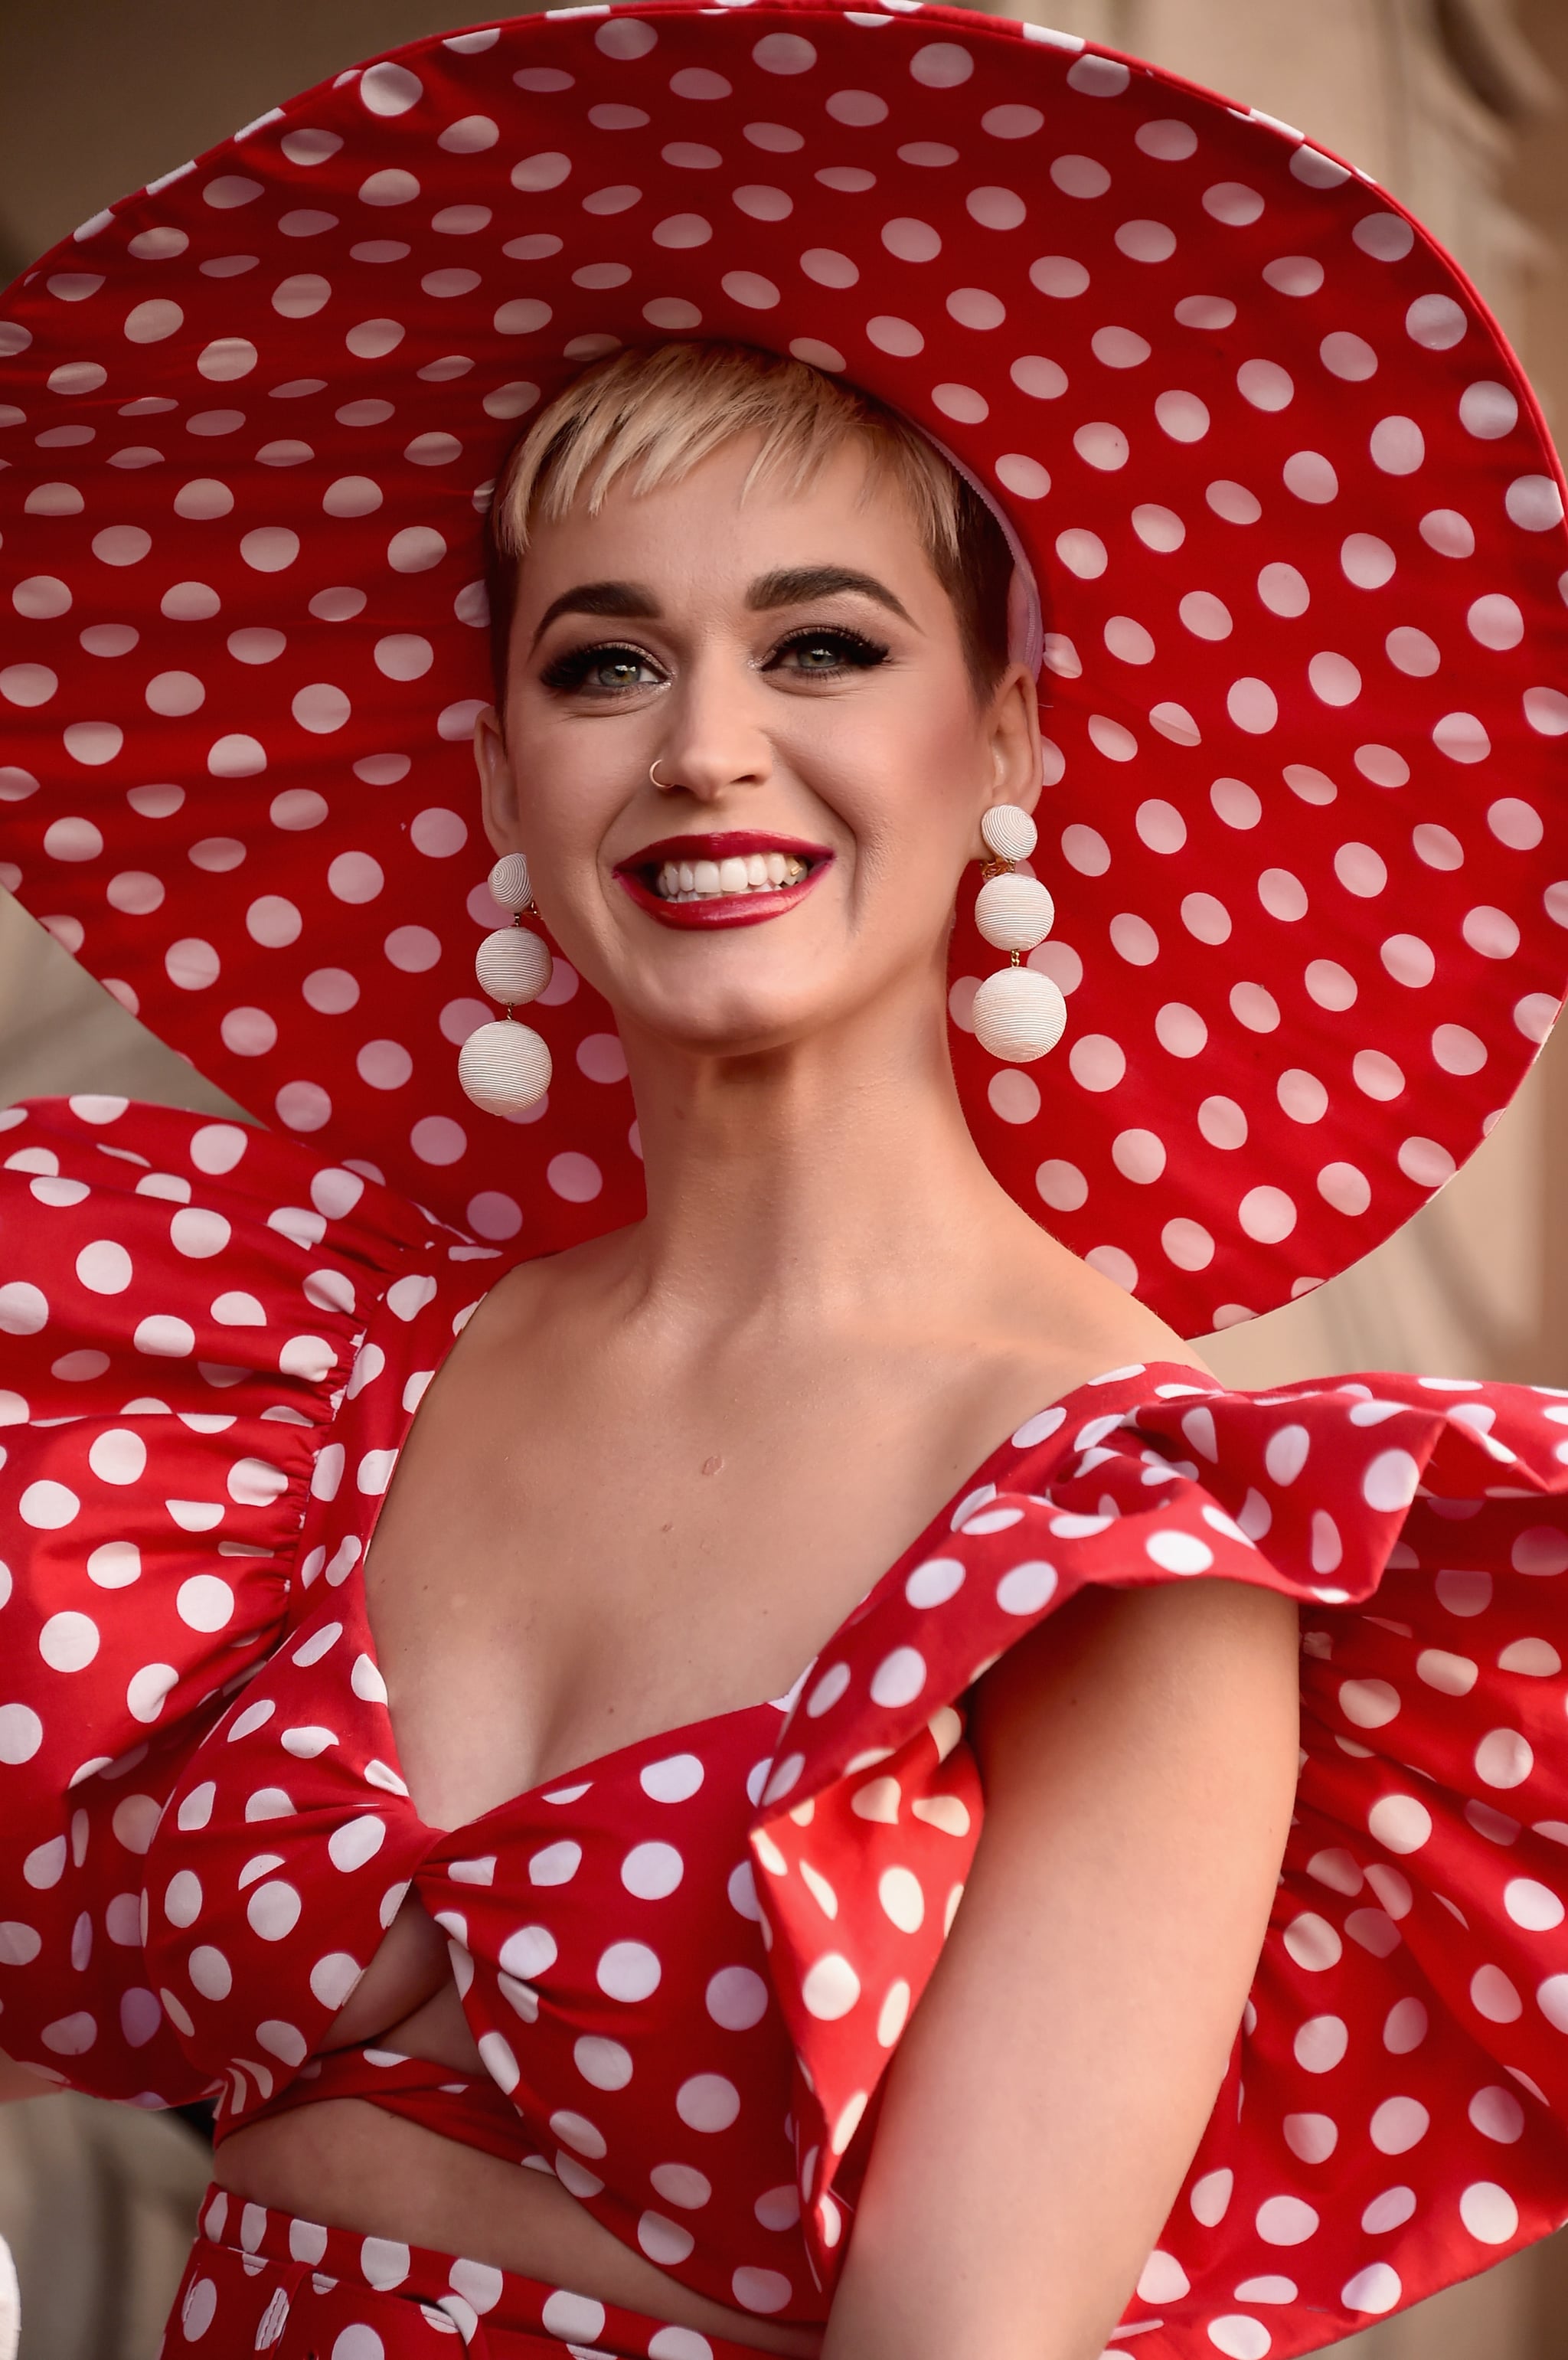 HOLLYWOOD, CA - JANUARY 22:  Singer Katy Perry speaks during a star ceremony in celebration of the 90th anniversary of Disney's Minnie Mouse at the Hollywood Walk of Fame on January 22, 2018 in Hollywood, California.  (Photo by Alberto E. Rodriguez/Getty Images)